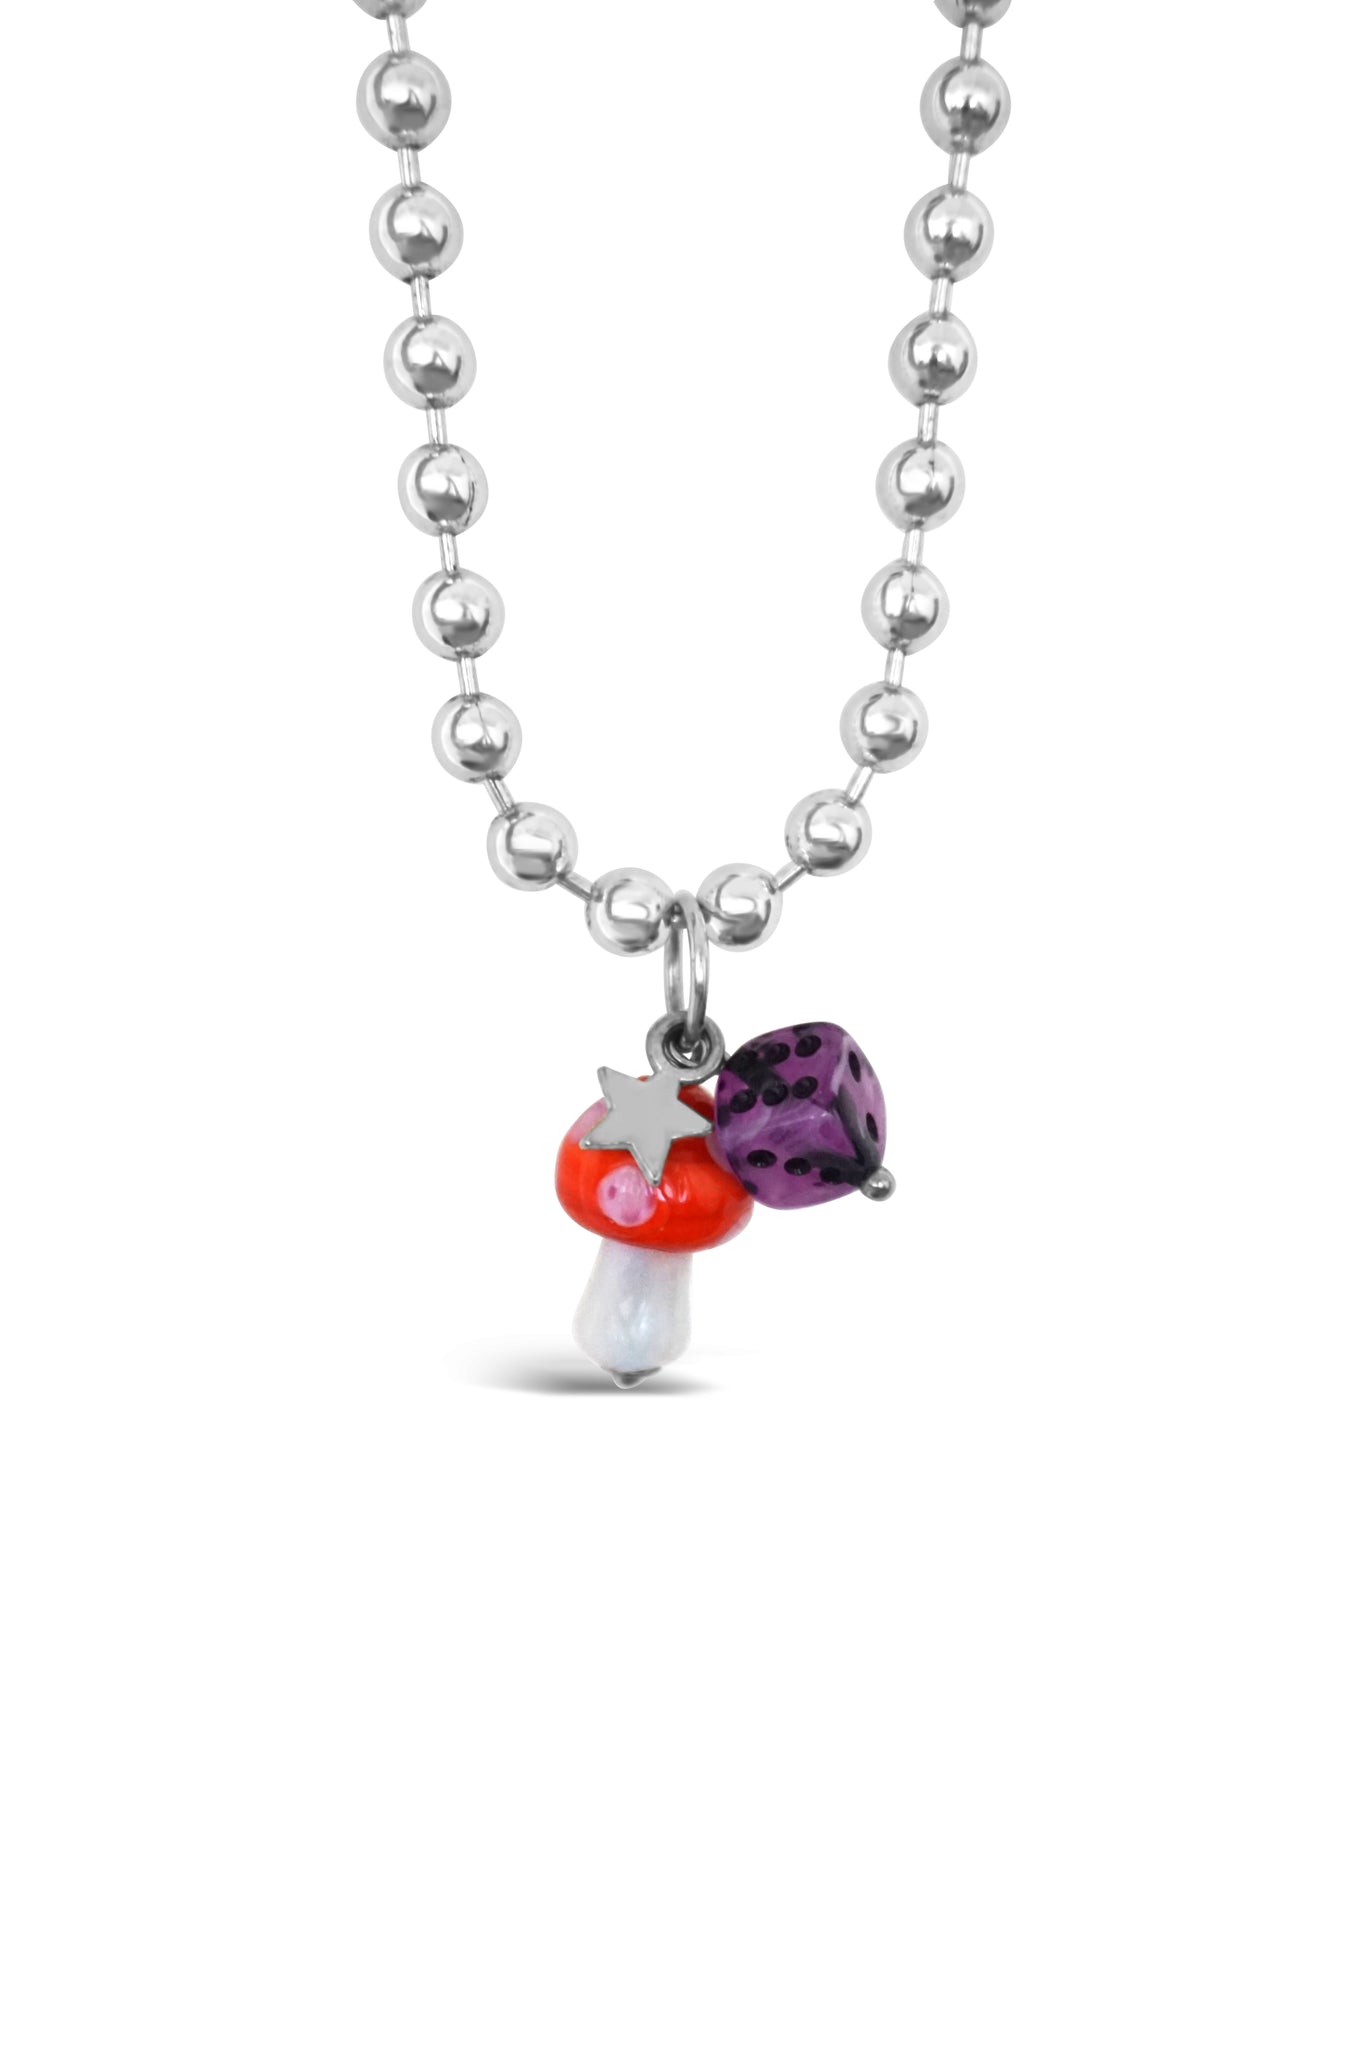 The Dice & Mushroom Charm Chain Necklace